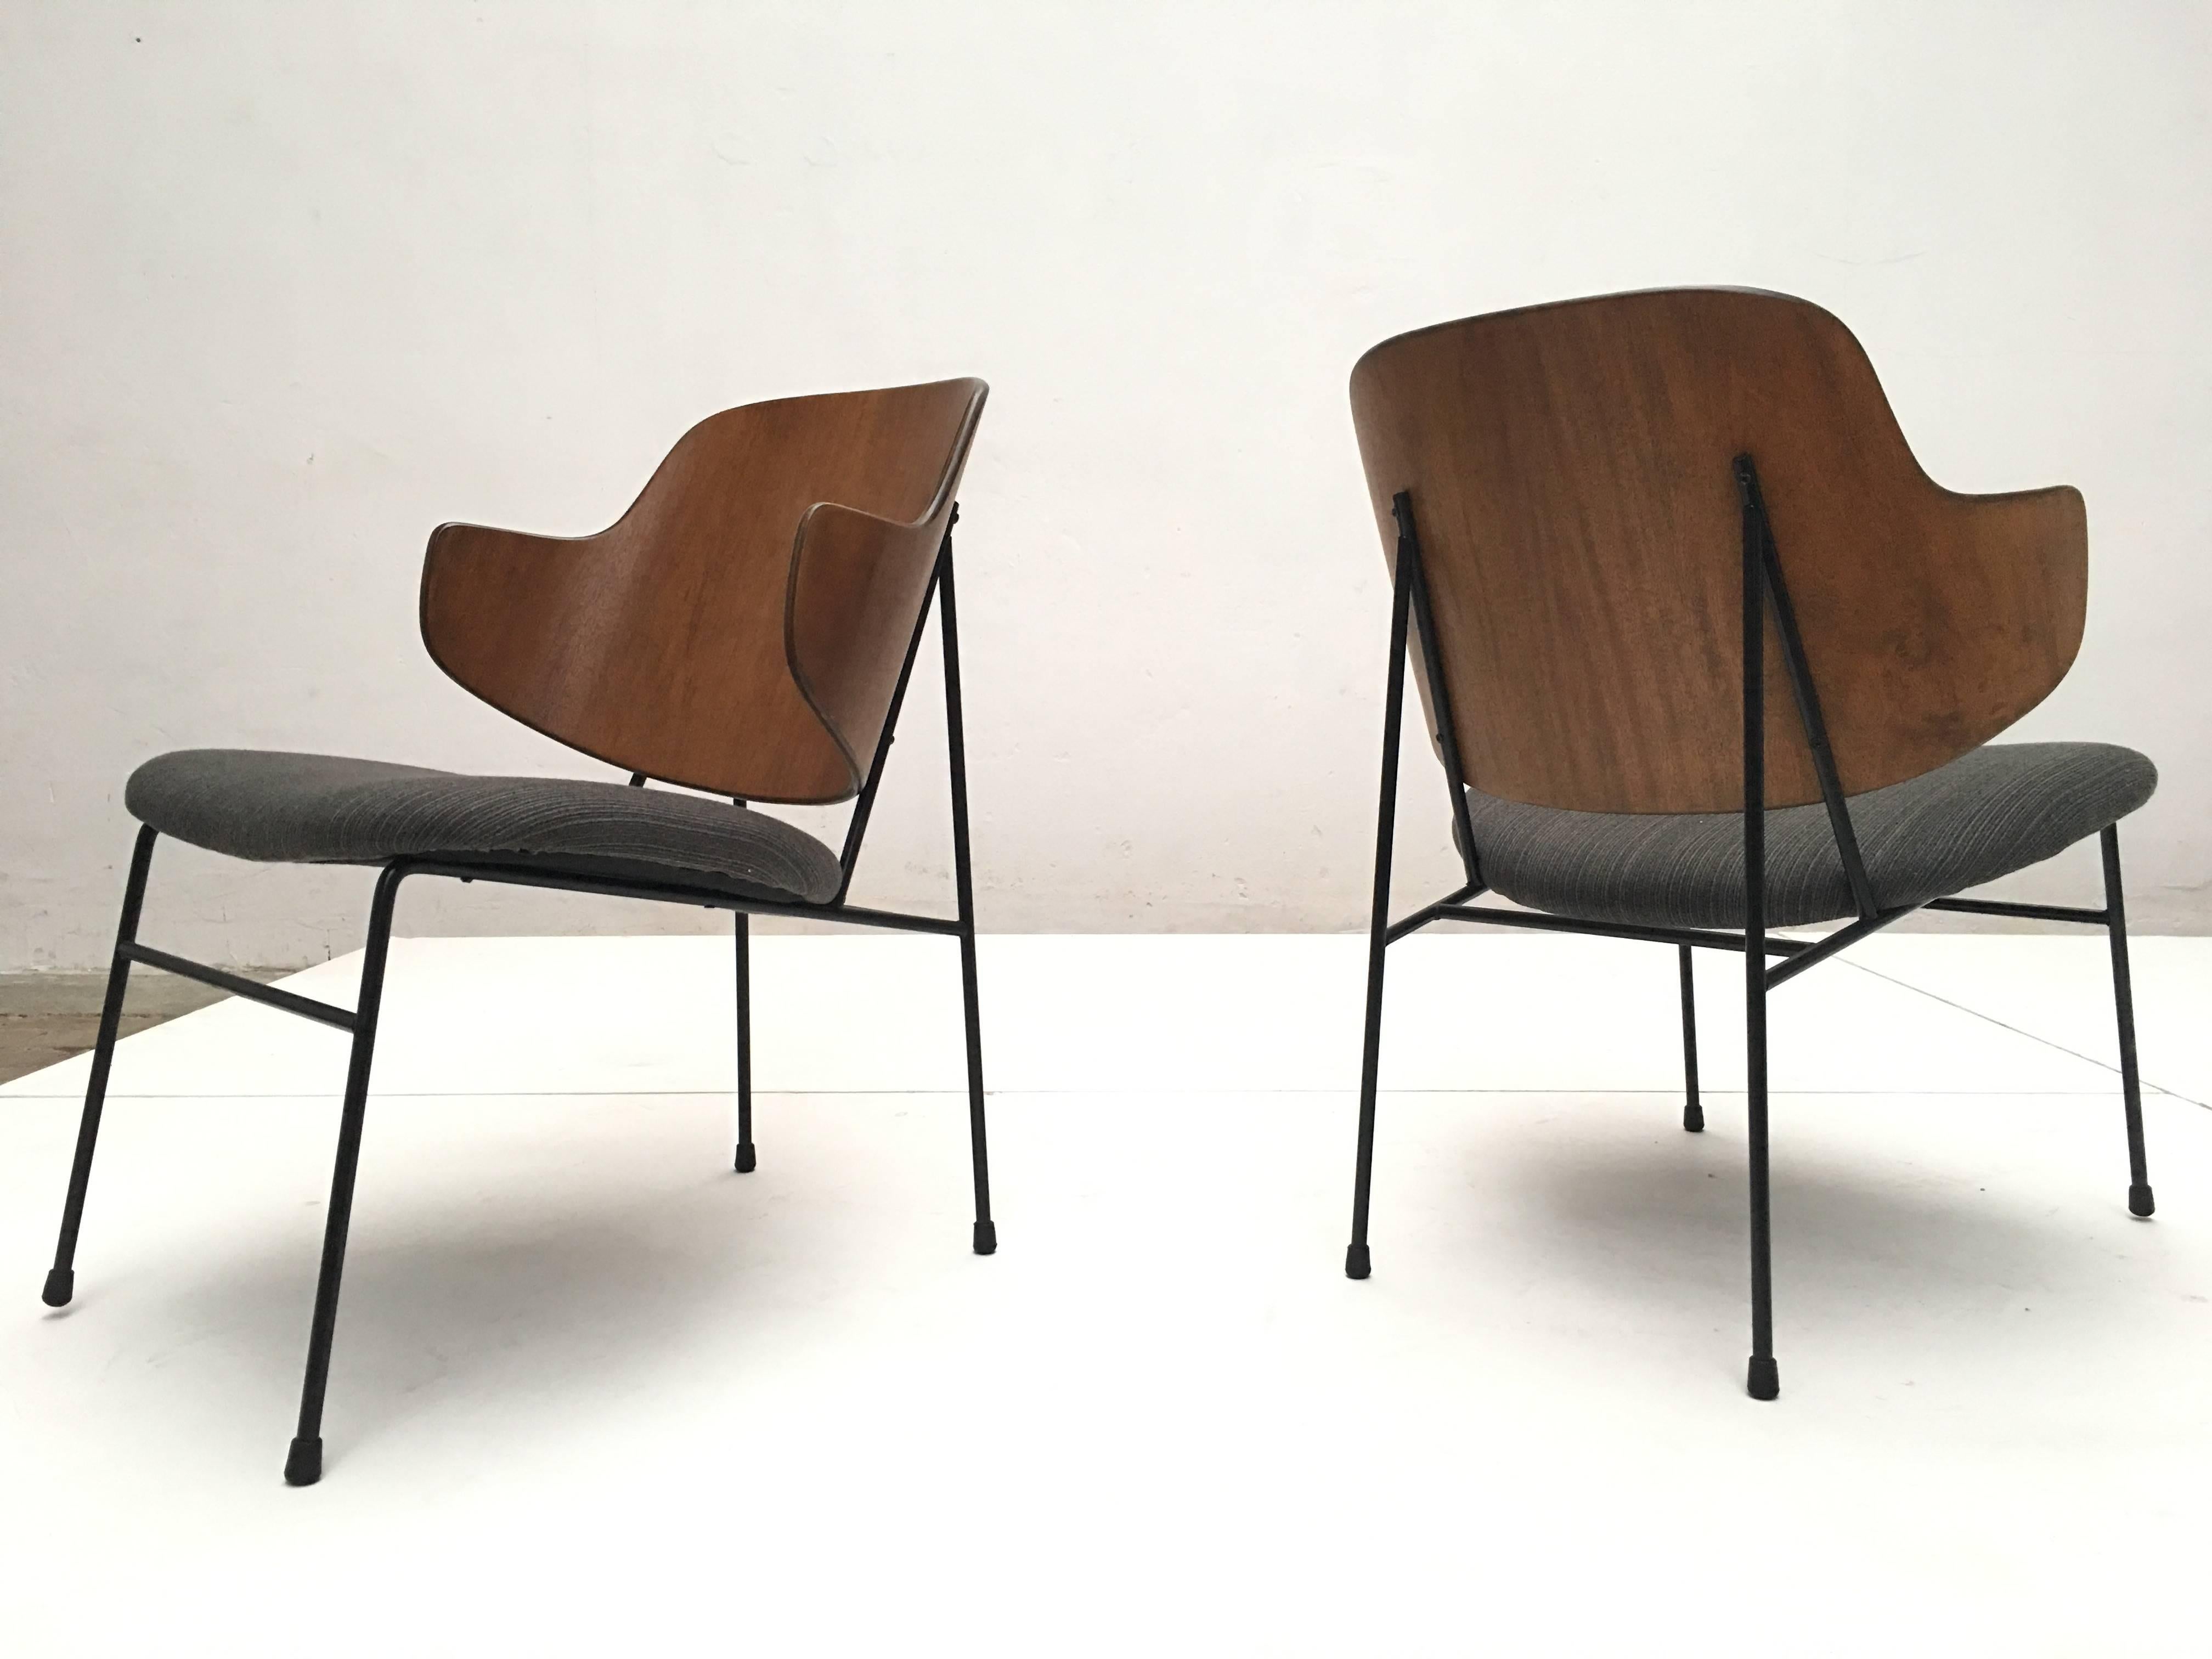 Lovely pair of easy chairs by Danish designer Ib Kofod-Larsen 

The chairs have been fully restored with refurbished plywood and metal frame and new upholstery

We got these chairs from a beautiful mid century modern house by architect Gene